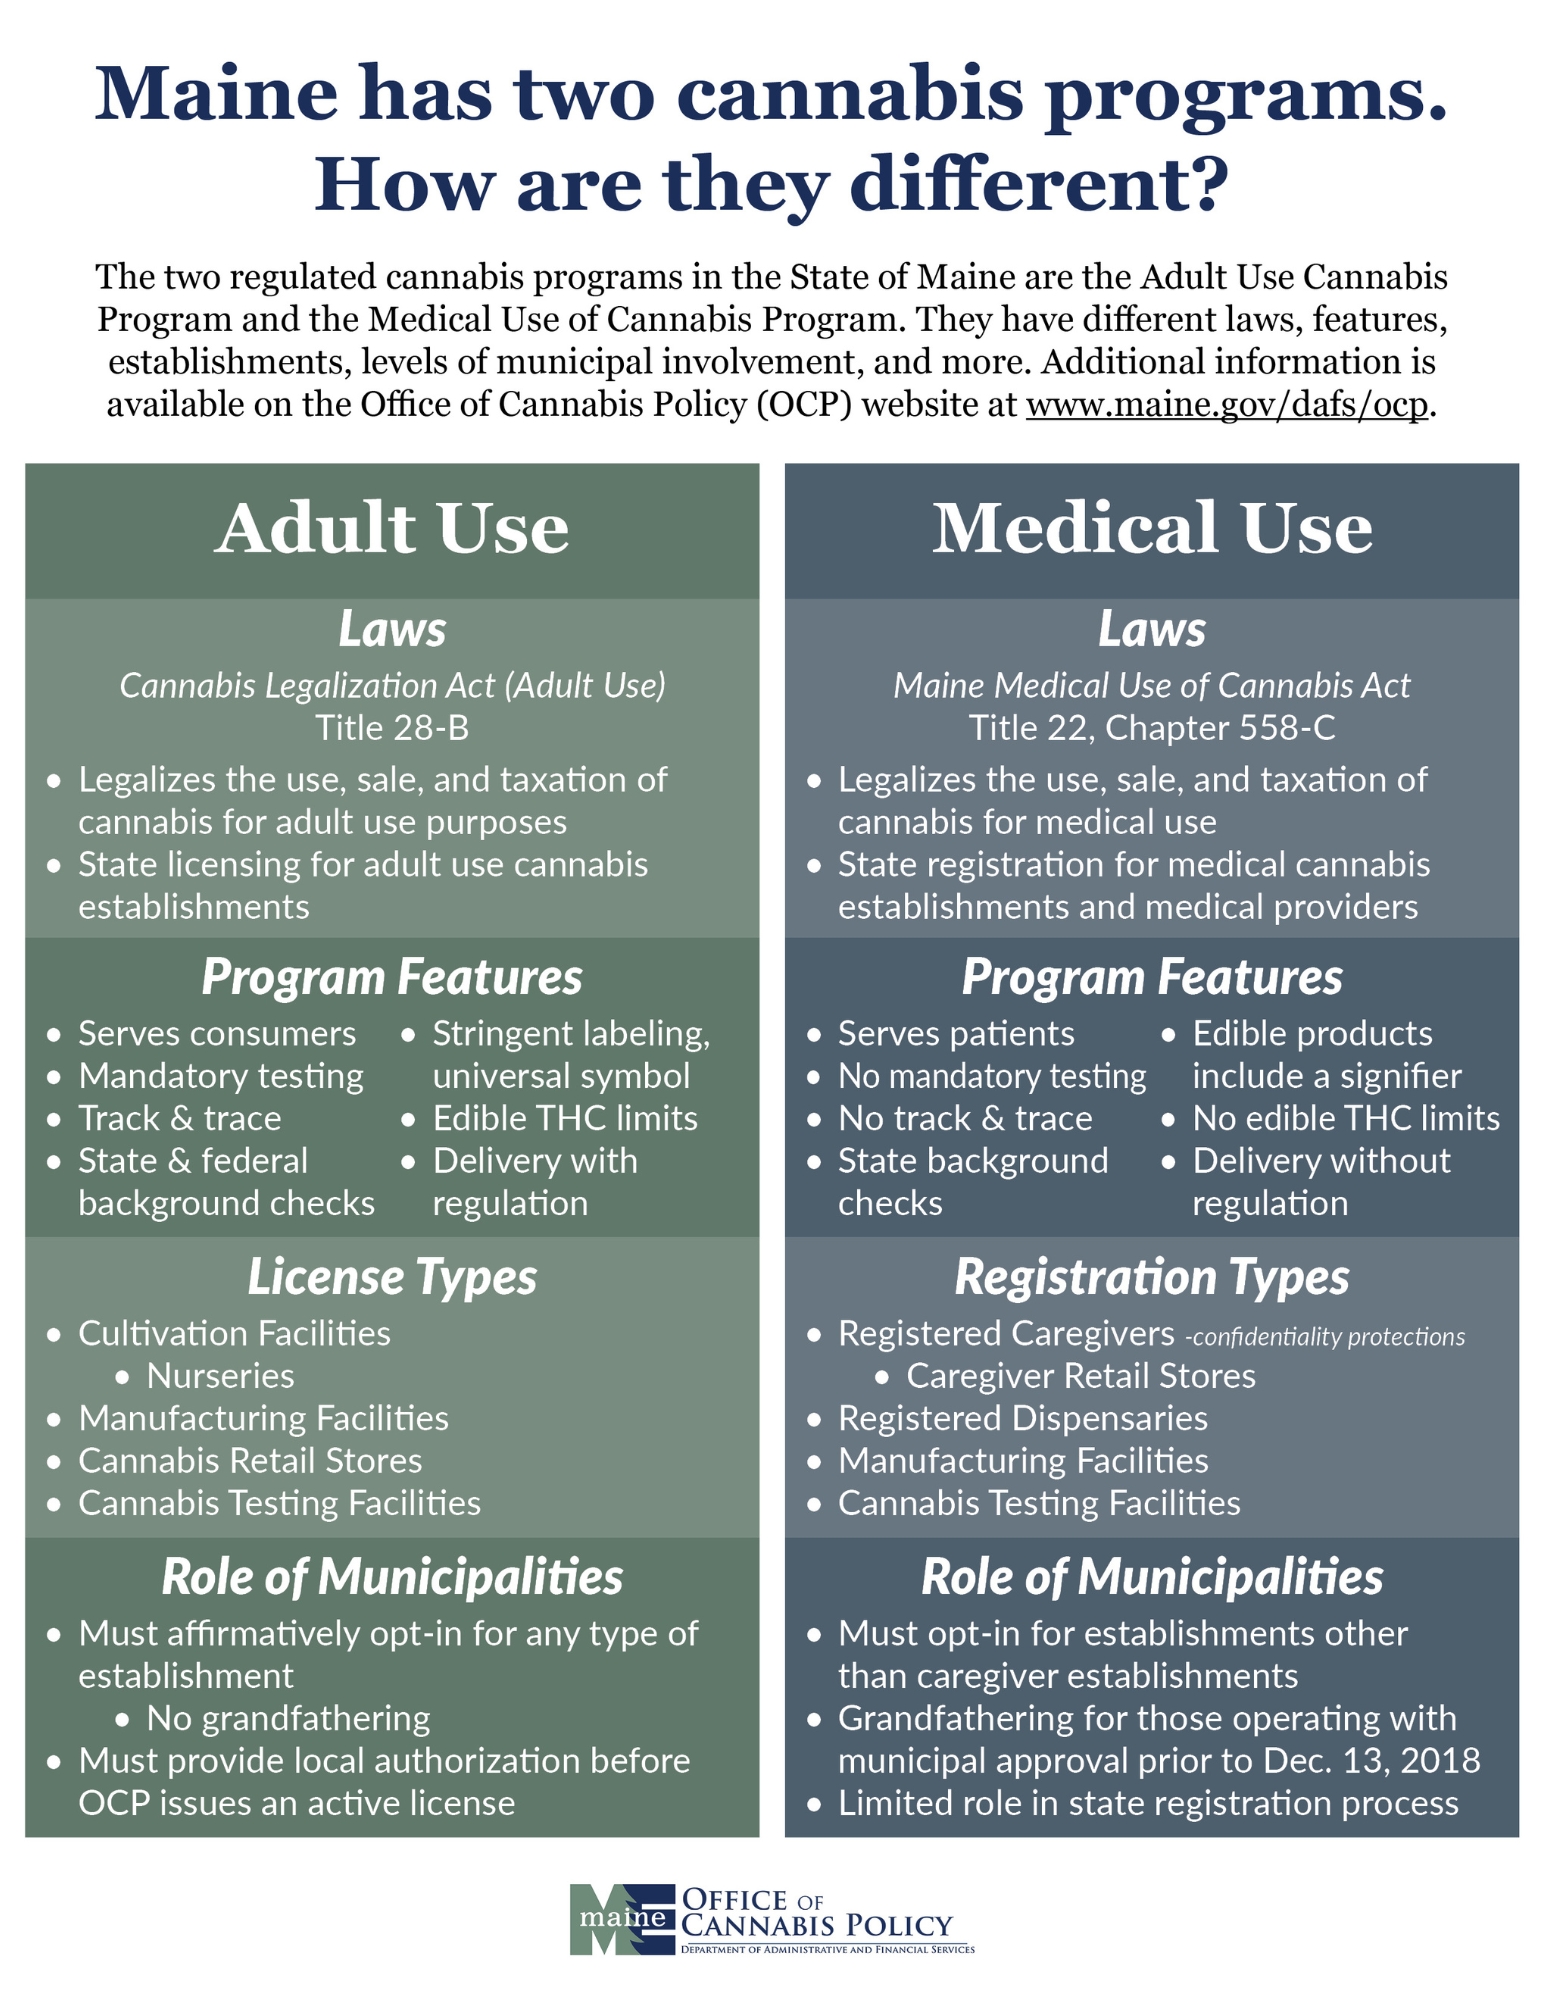 The differences between Maine's Medical & Adult Use Programs